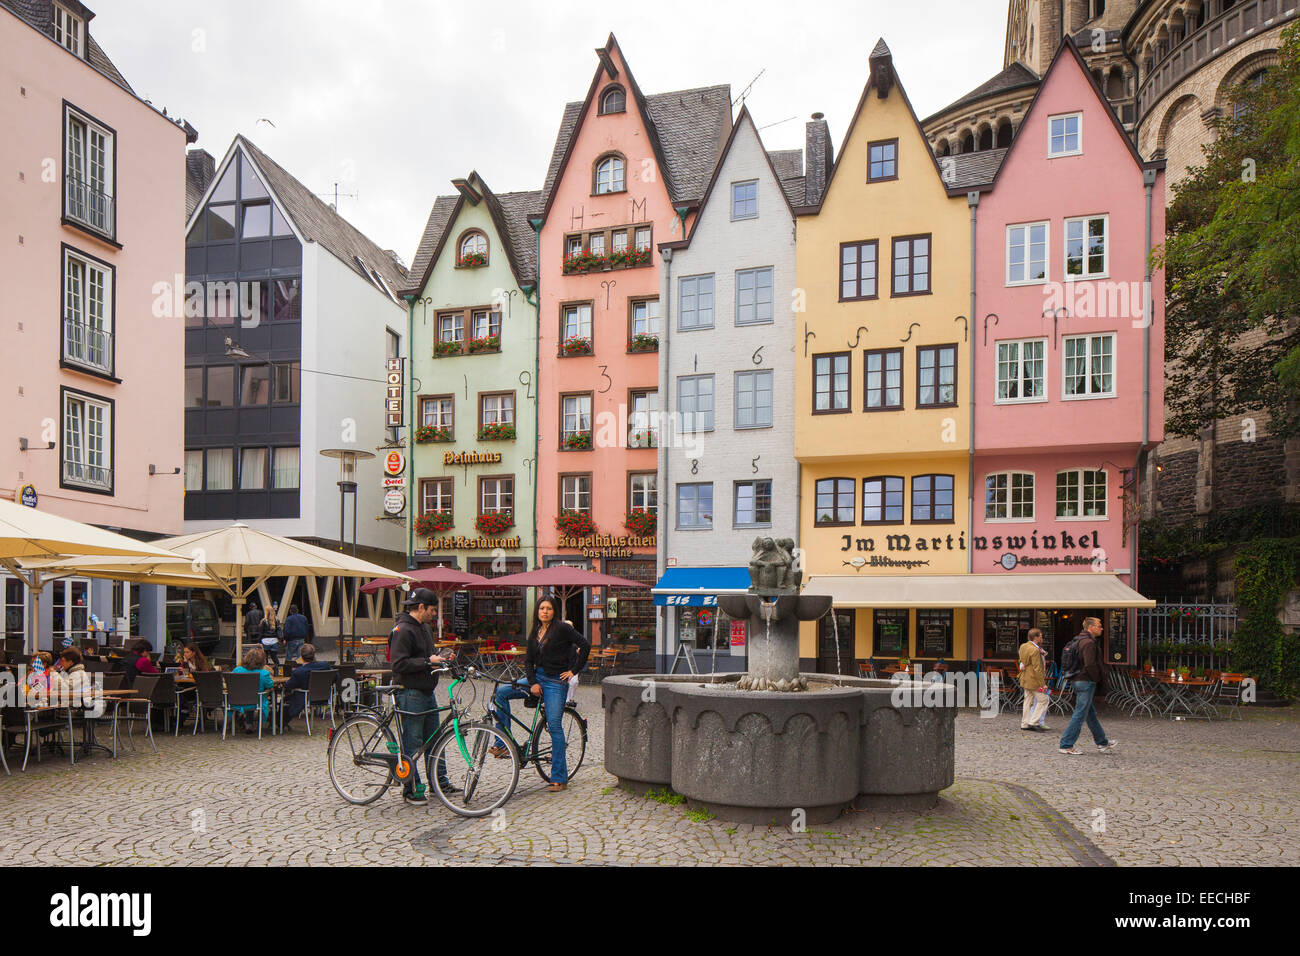 Fischmarkt. Cologne, Germany. Stock Photo